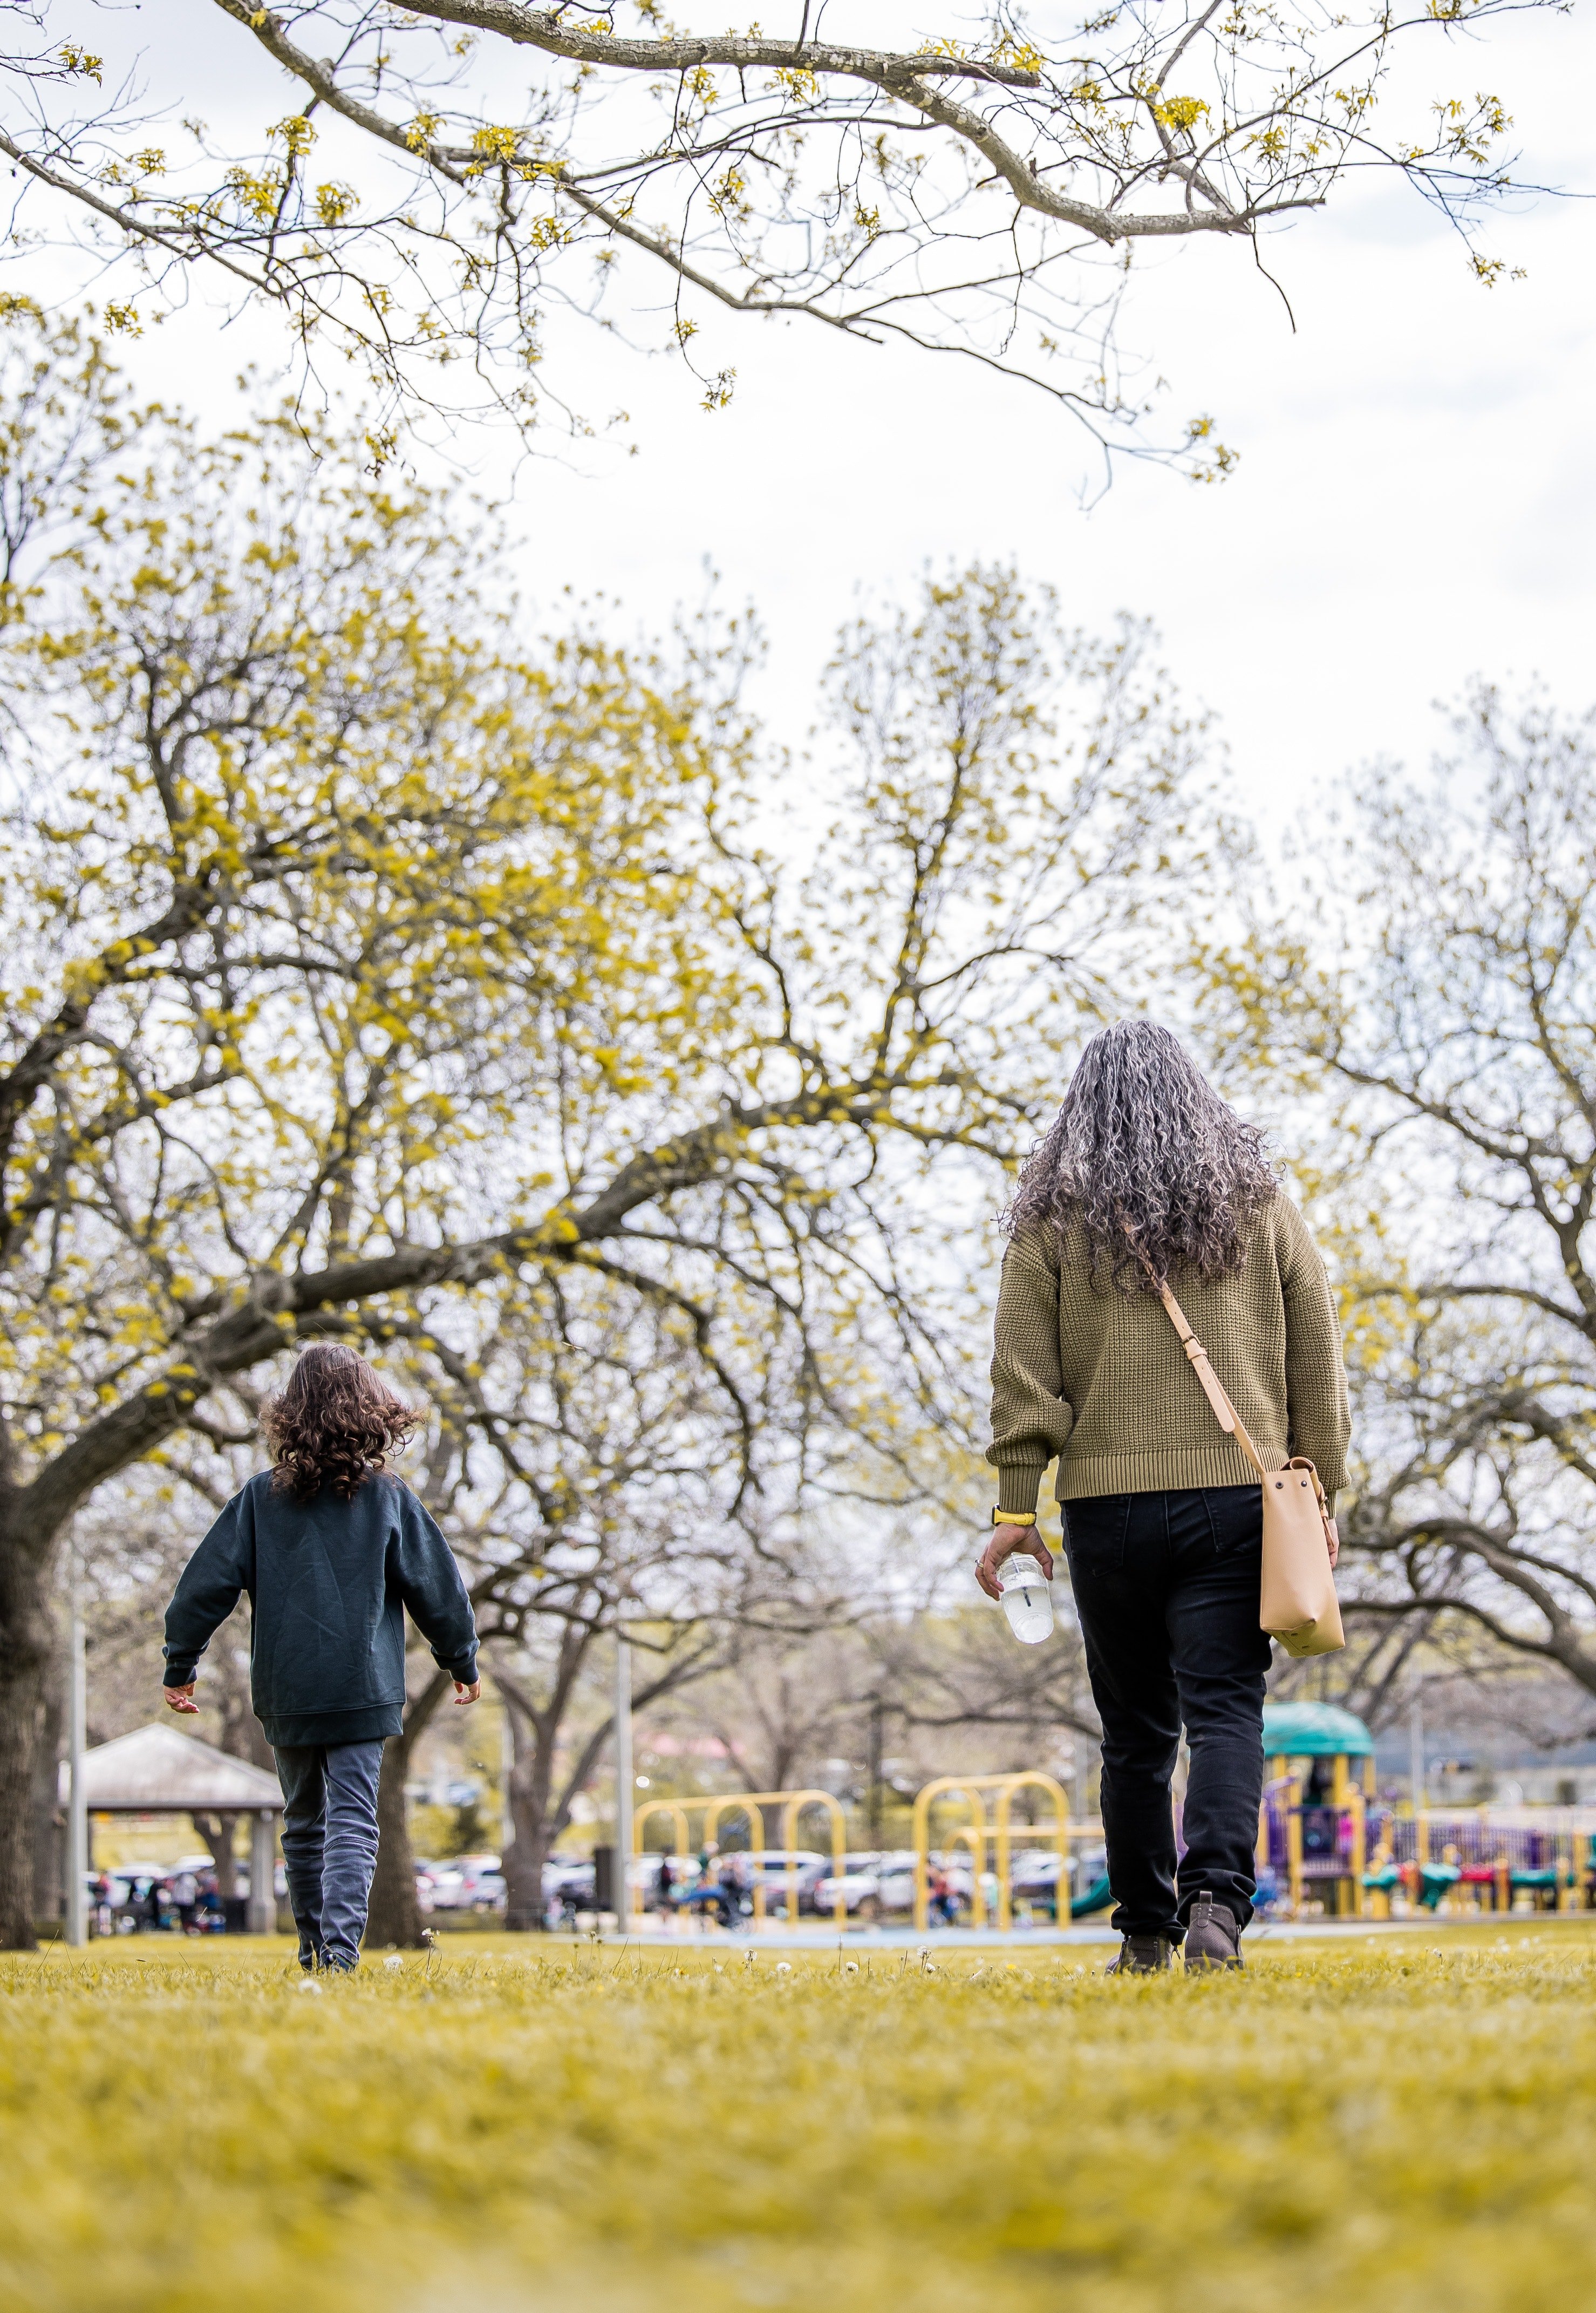 The little girl had come to the park with someone special. | Source: Pexels